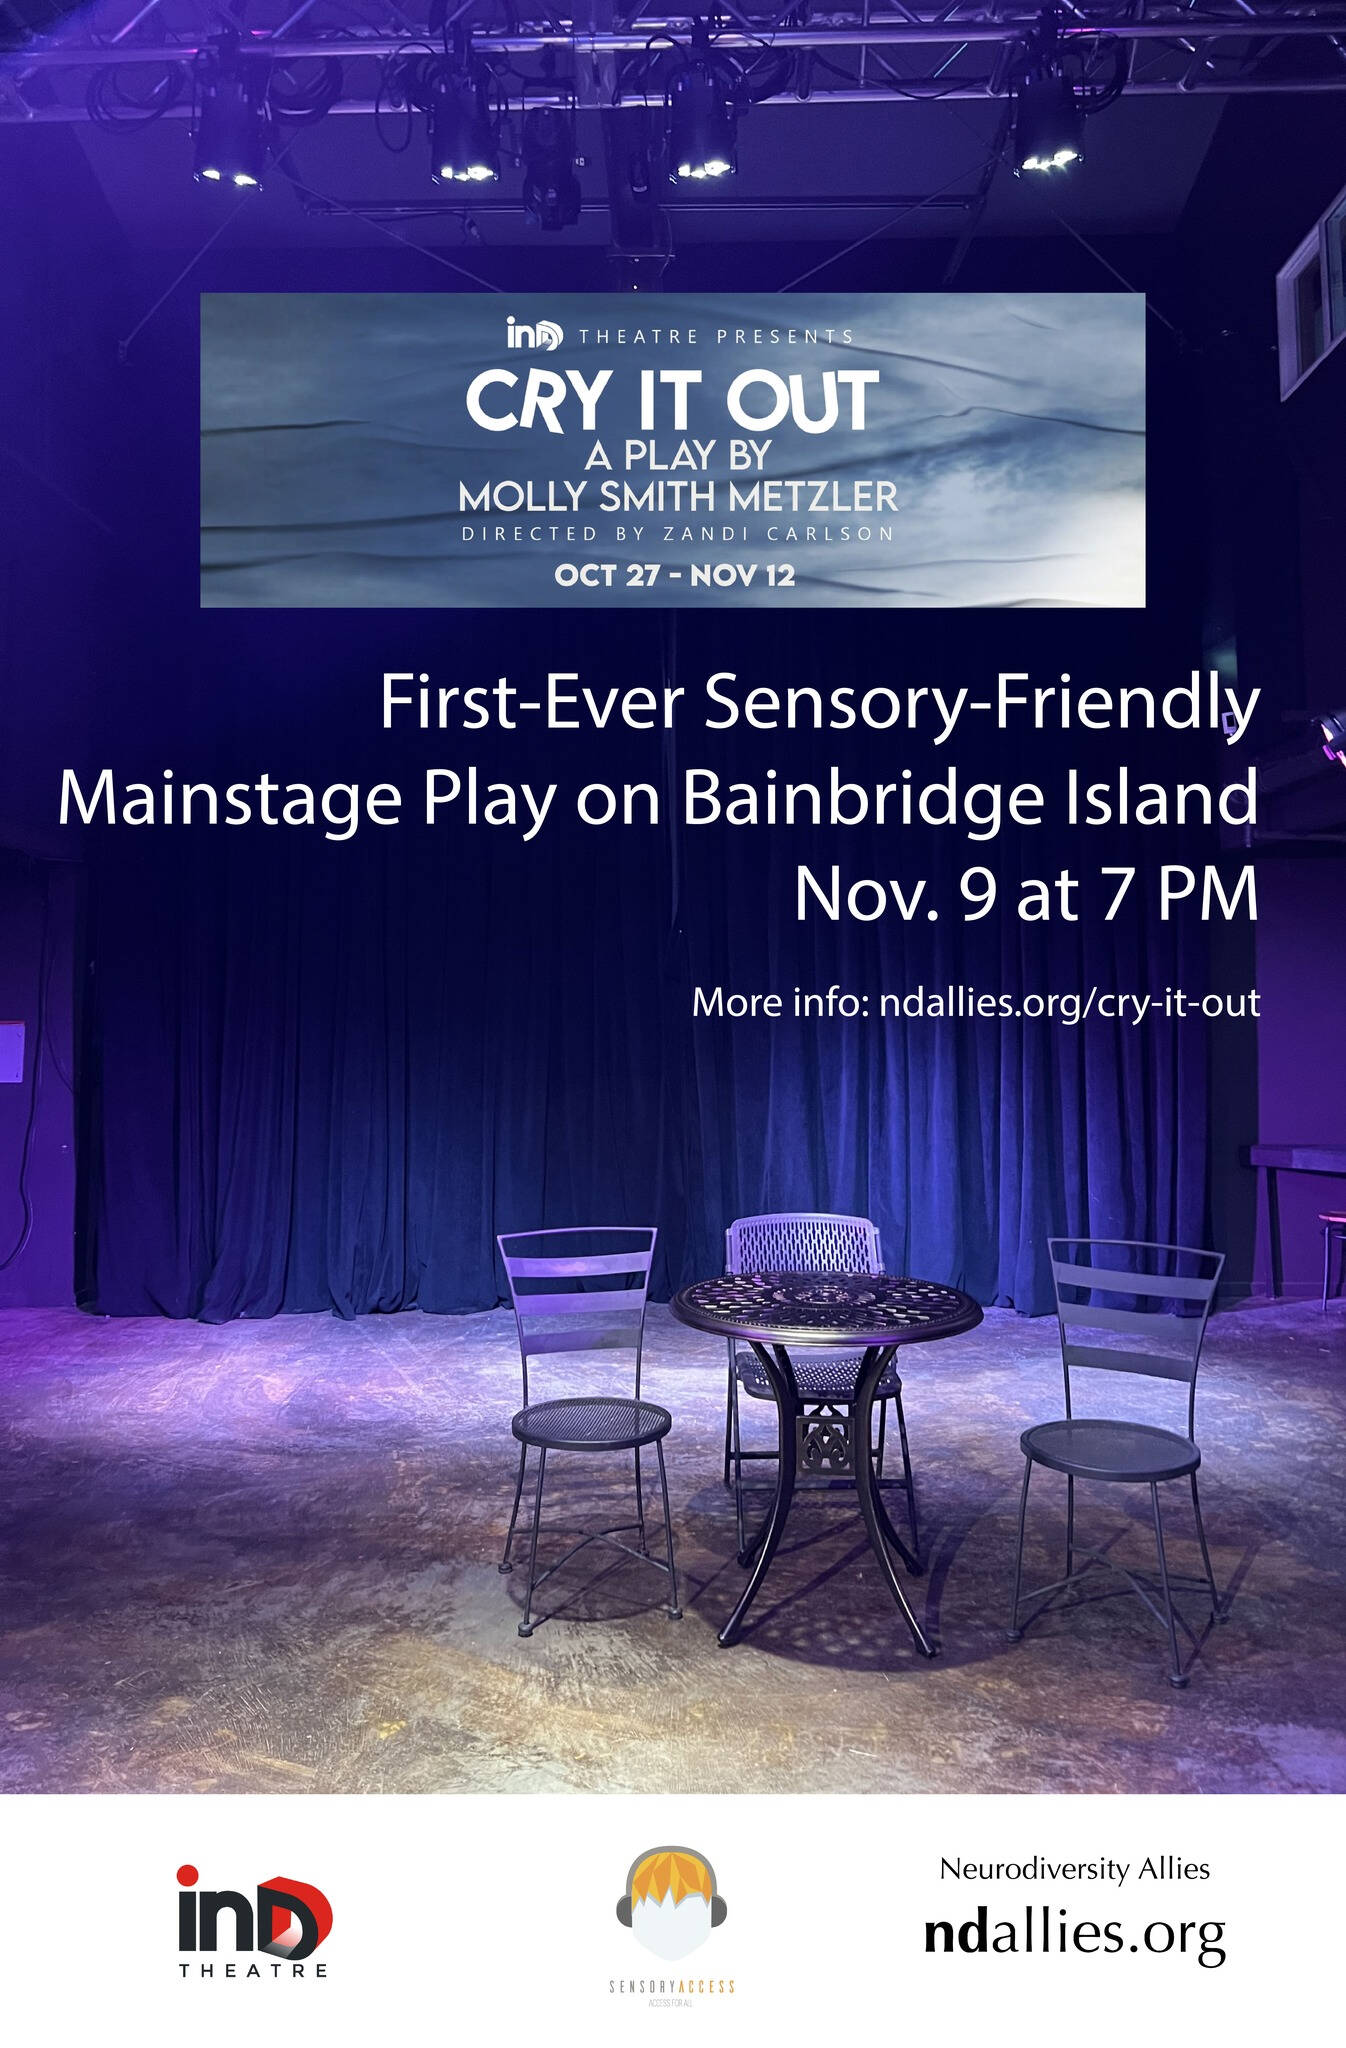 Neurodiversity Allies courtesy photo
Cry It Out will appear on Bainbridge Island next month.